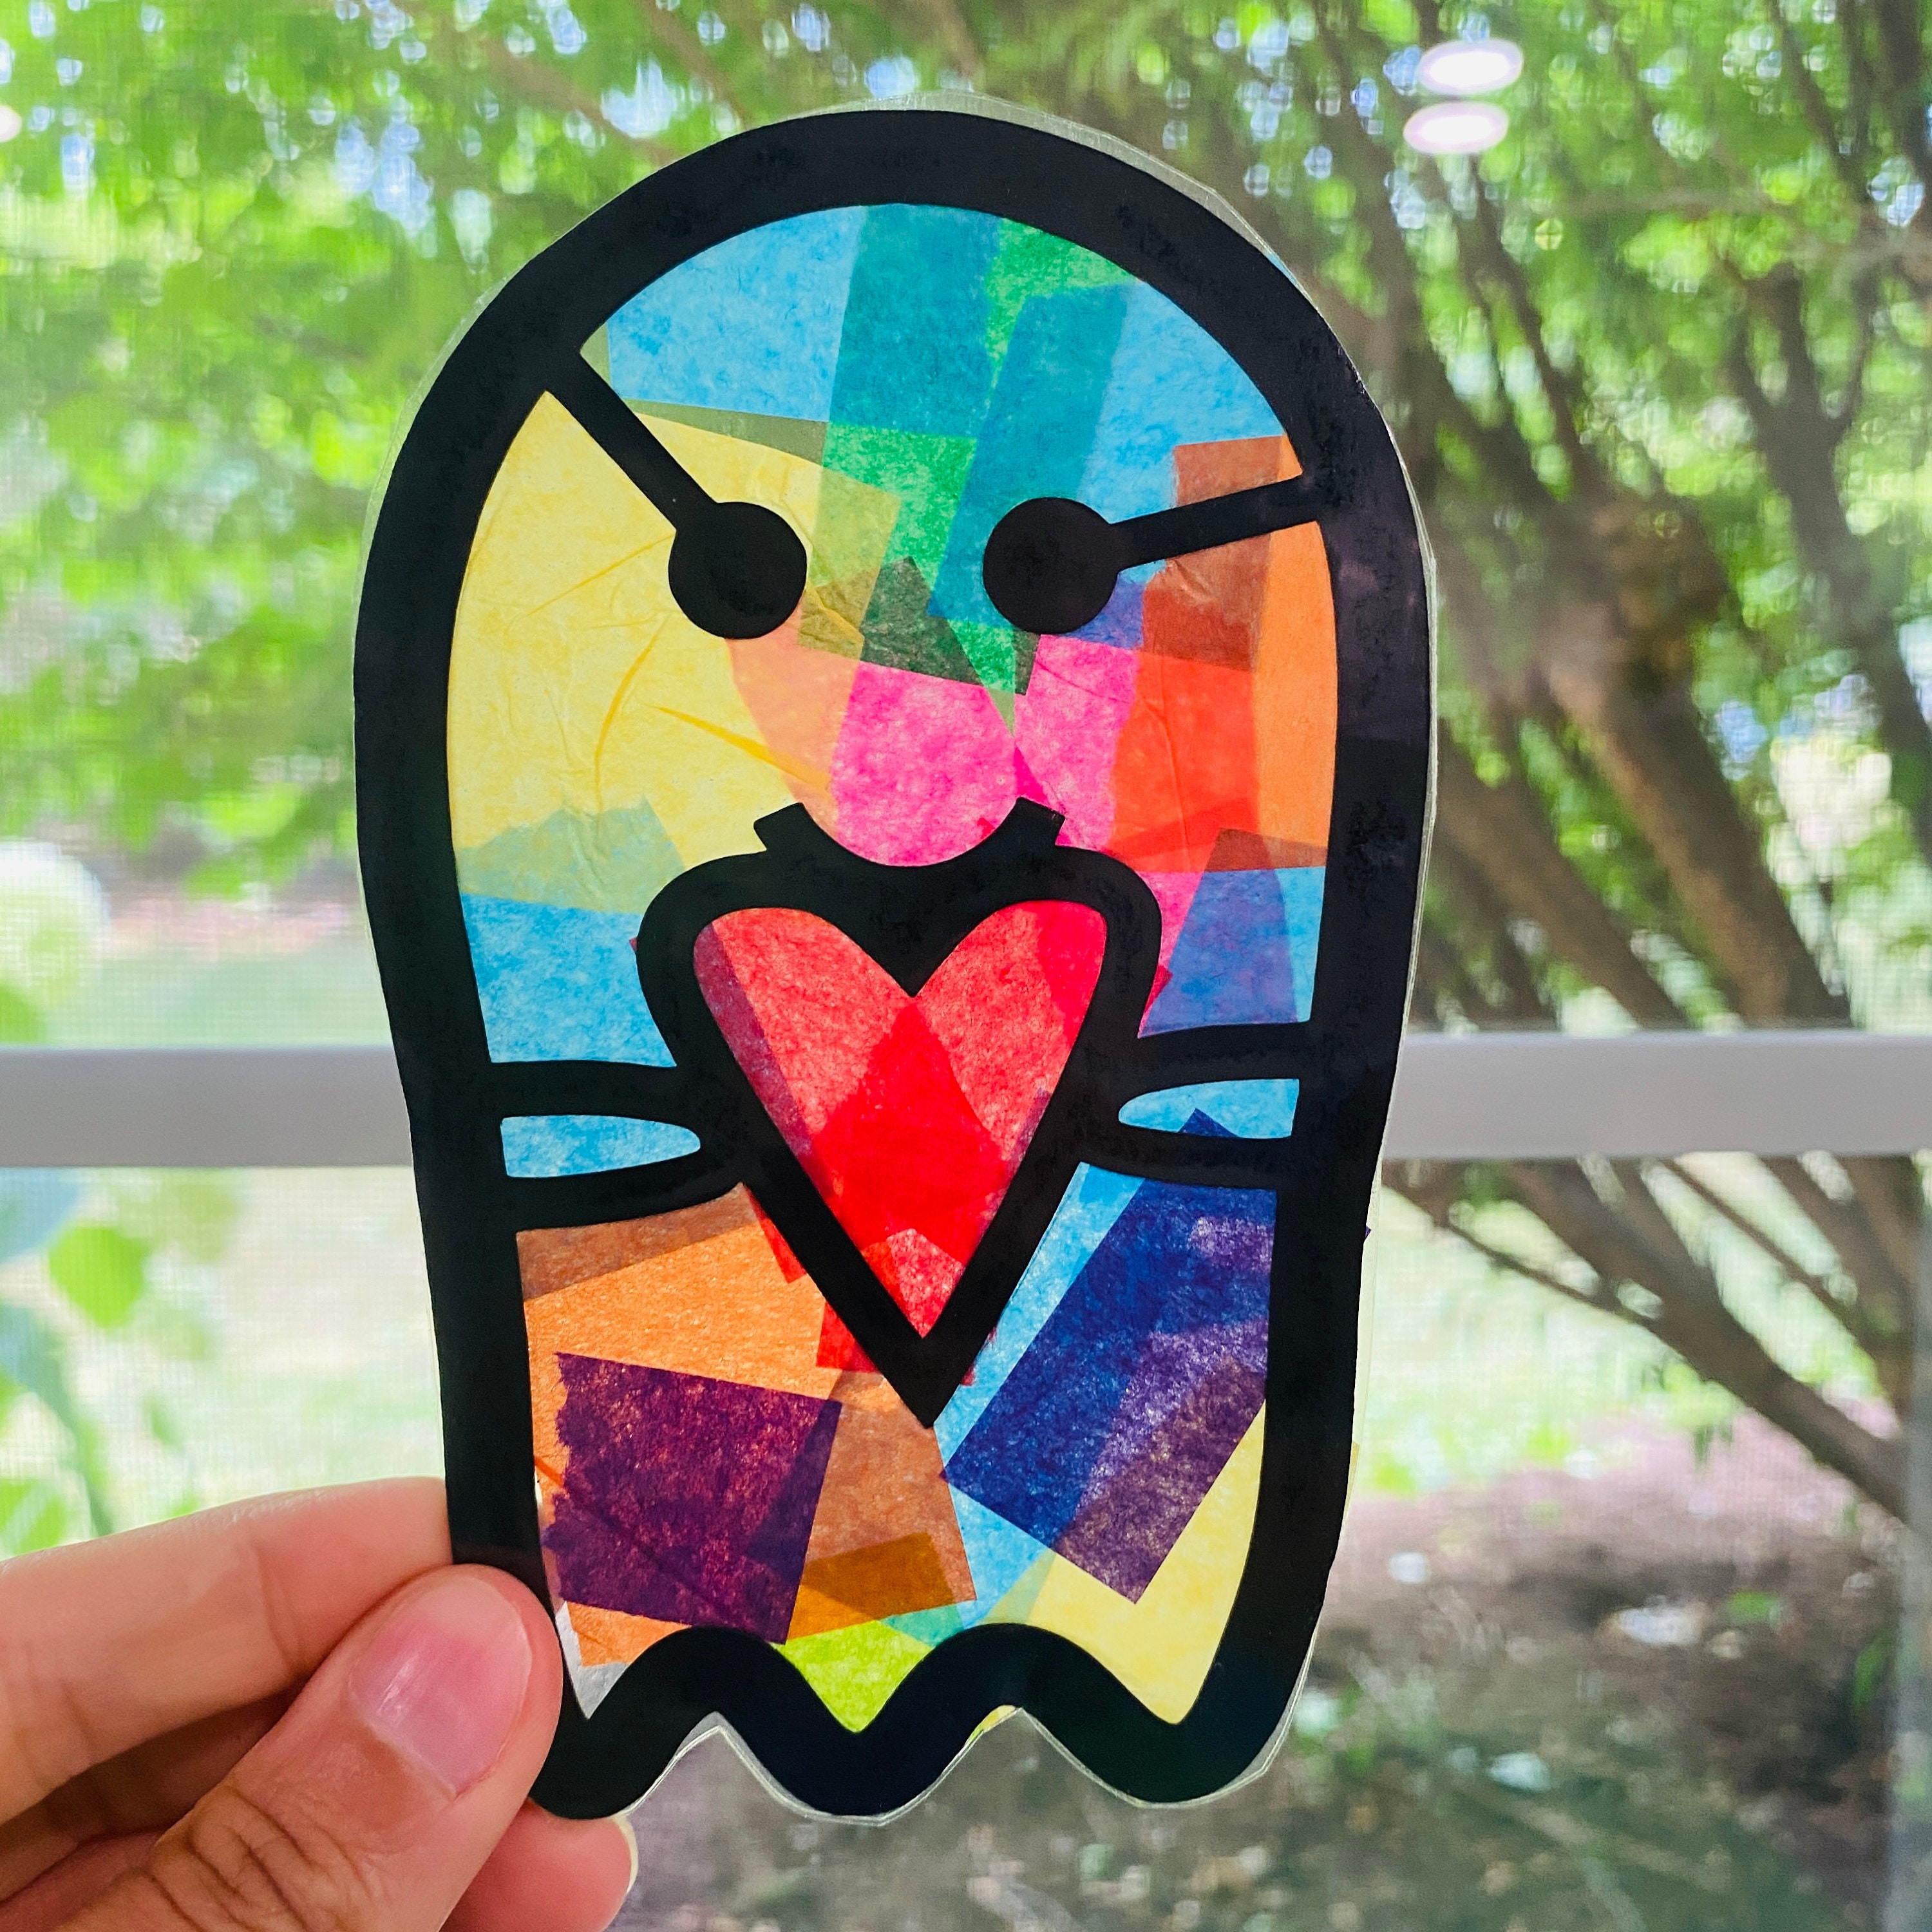 Whimsical Trees Suncatcher Kit Kids Craft Kit Adult Craft Stained Glass  Nature Project DIY Arts and Crafts Art Gift for Kids 